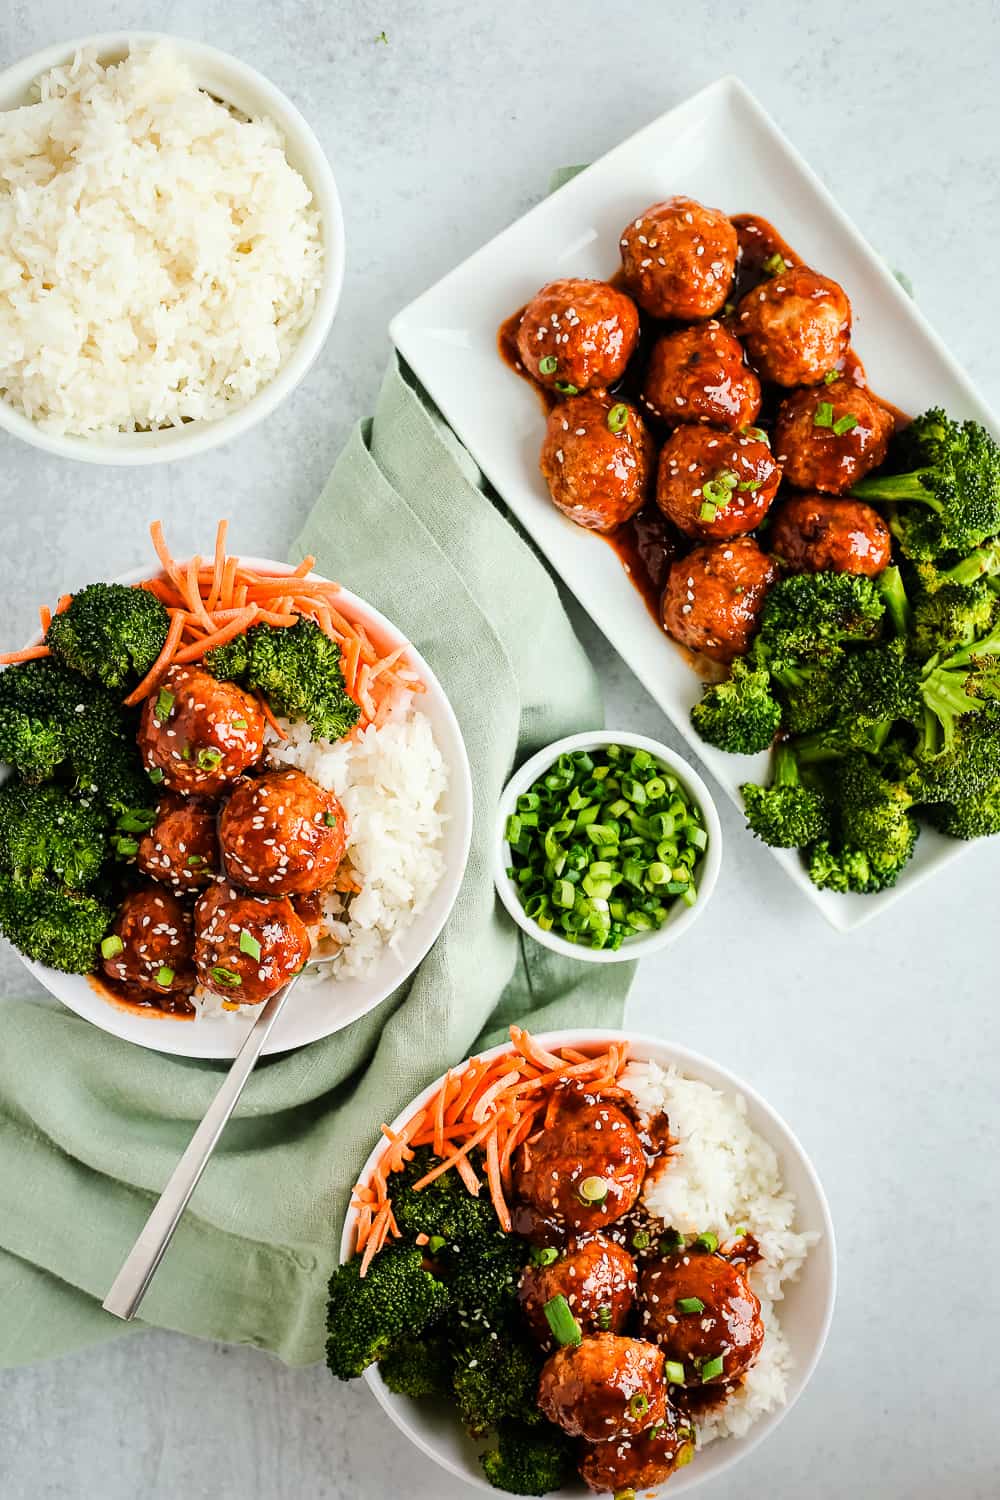 Overhead view of glazed spicy turkey meatballs with rice bowls, roasted broccoli, and sliced green onions